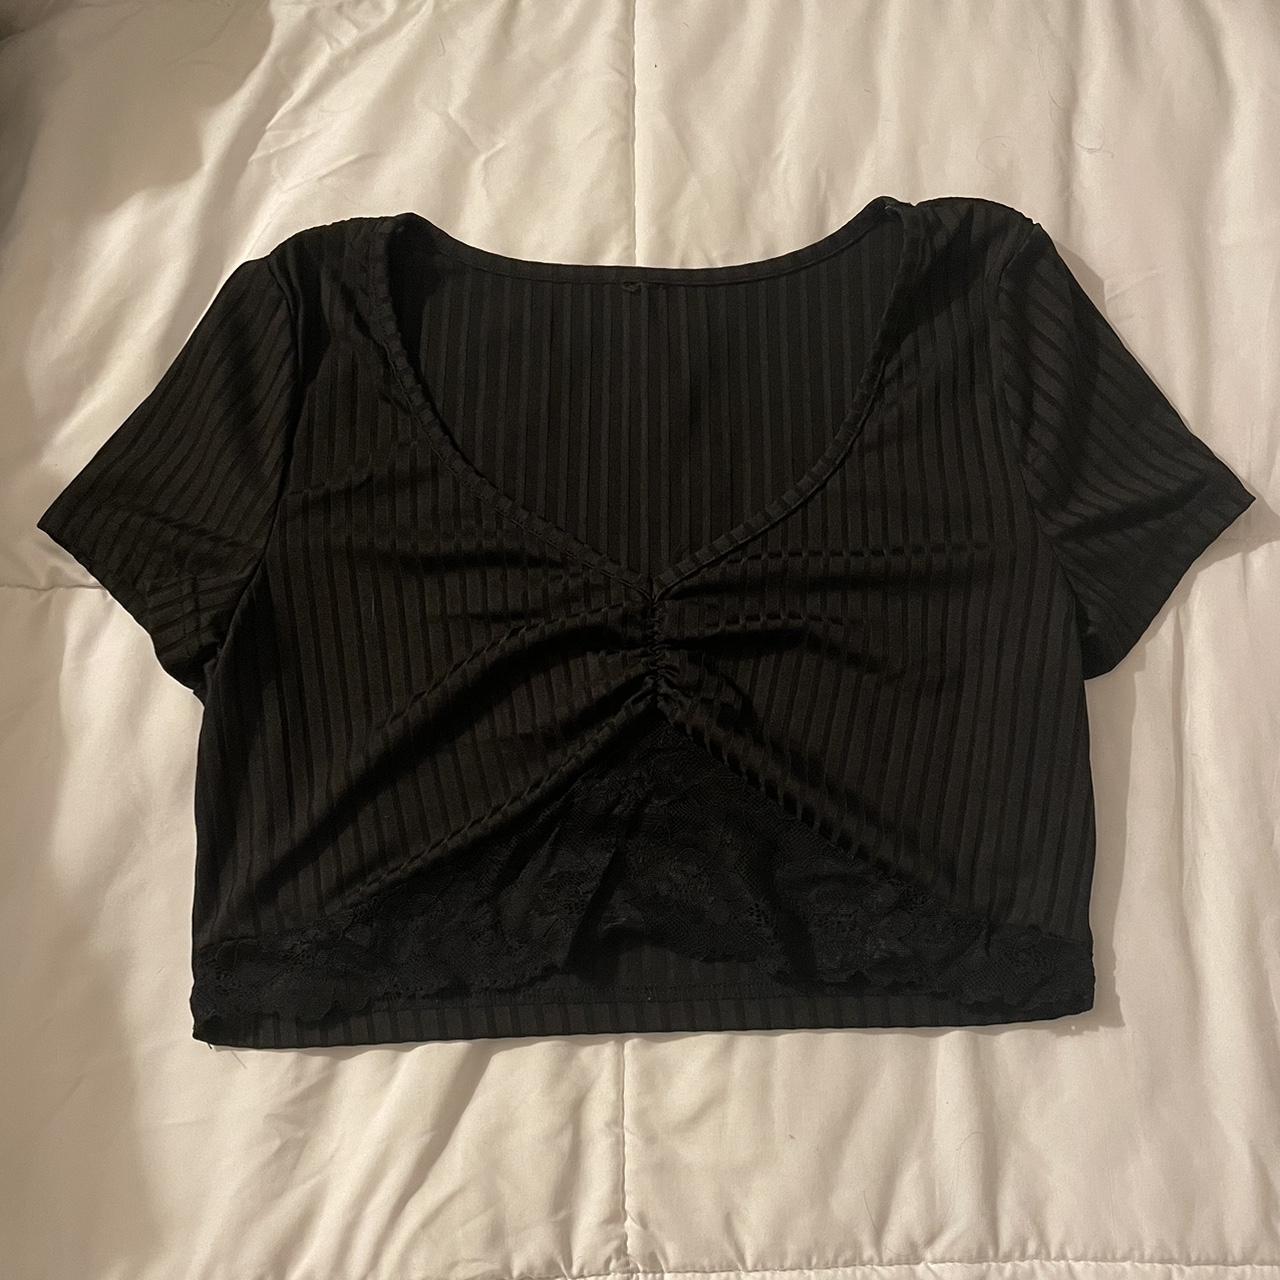 Size L Cropped top like new no flaws worn like... - Depop